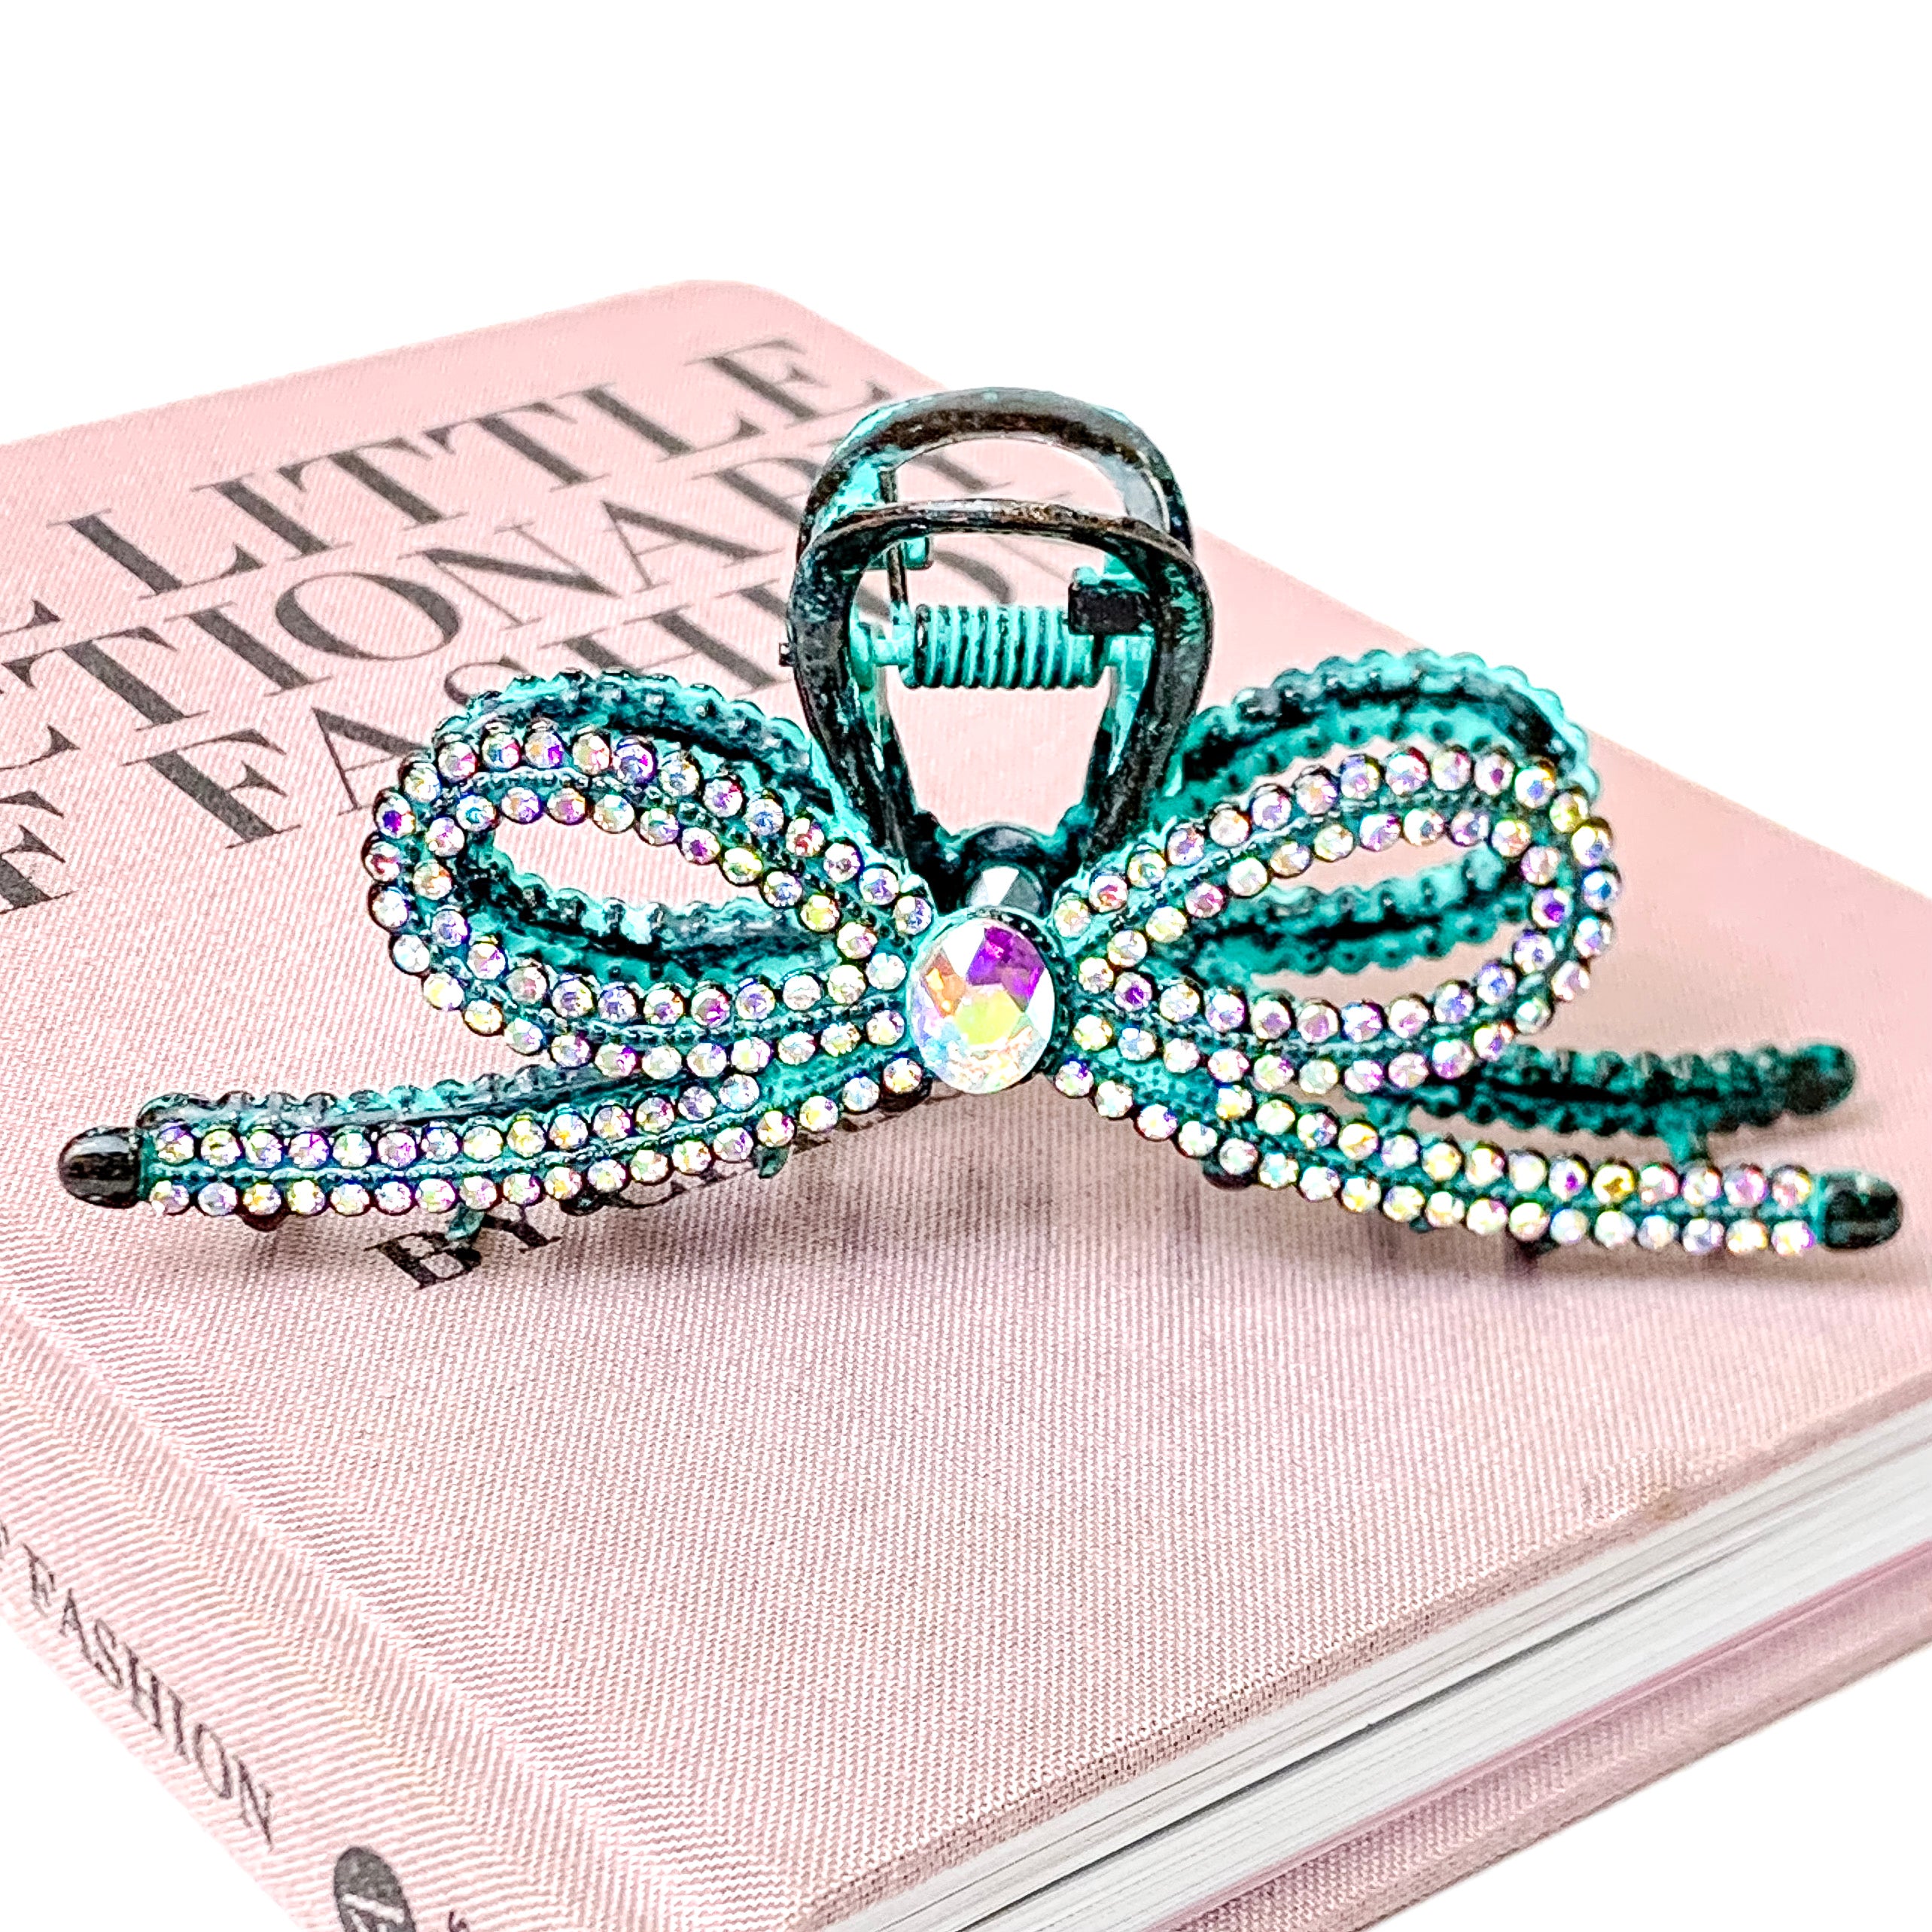 AB Crystal Embellished Ribbon Shaped Metal Hair Clip in Patina - Giddy Up Glamour Boutique